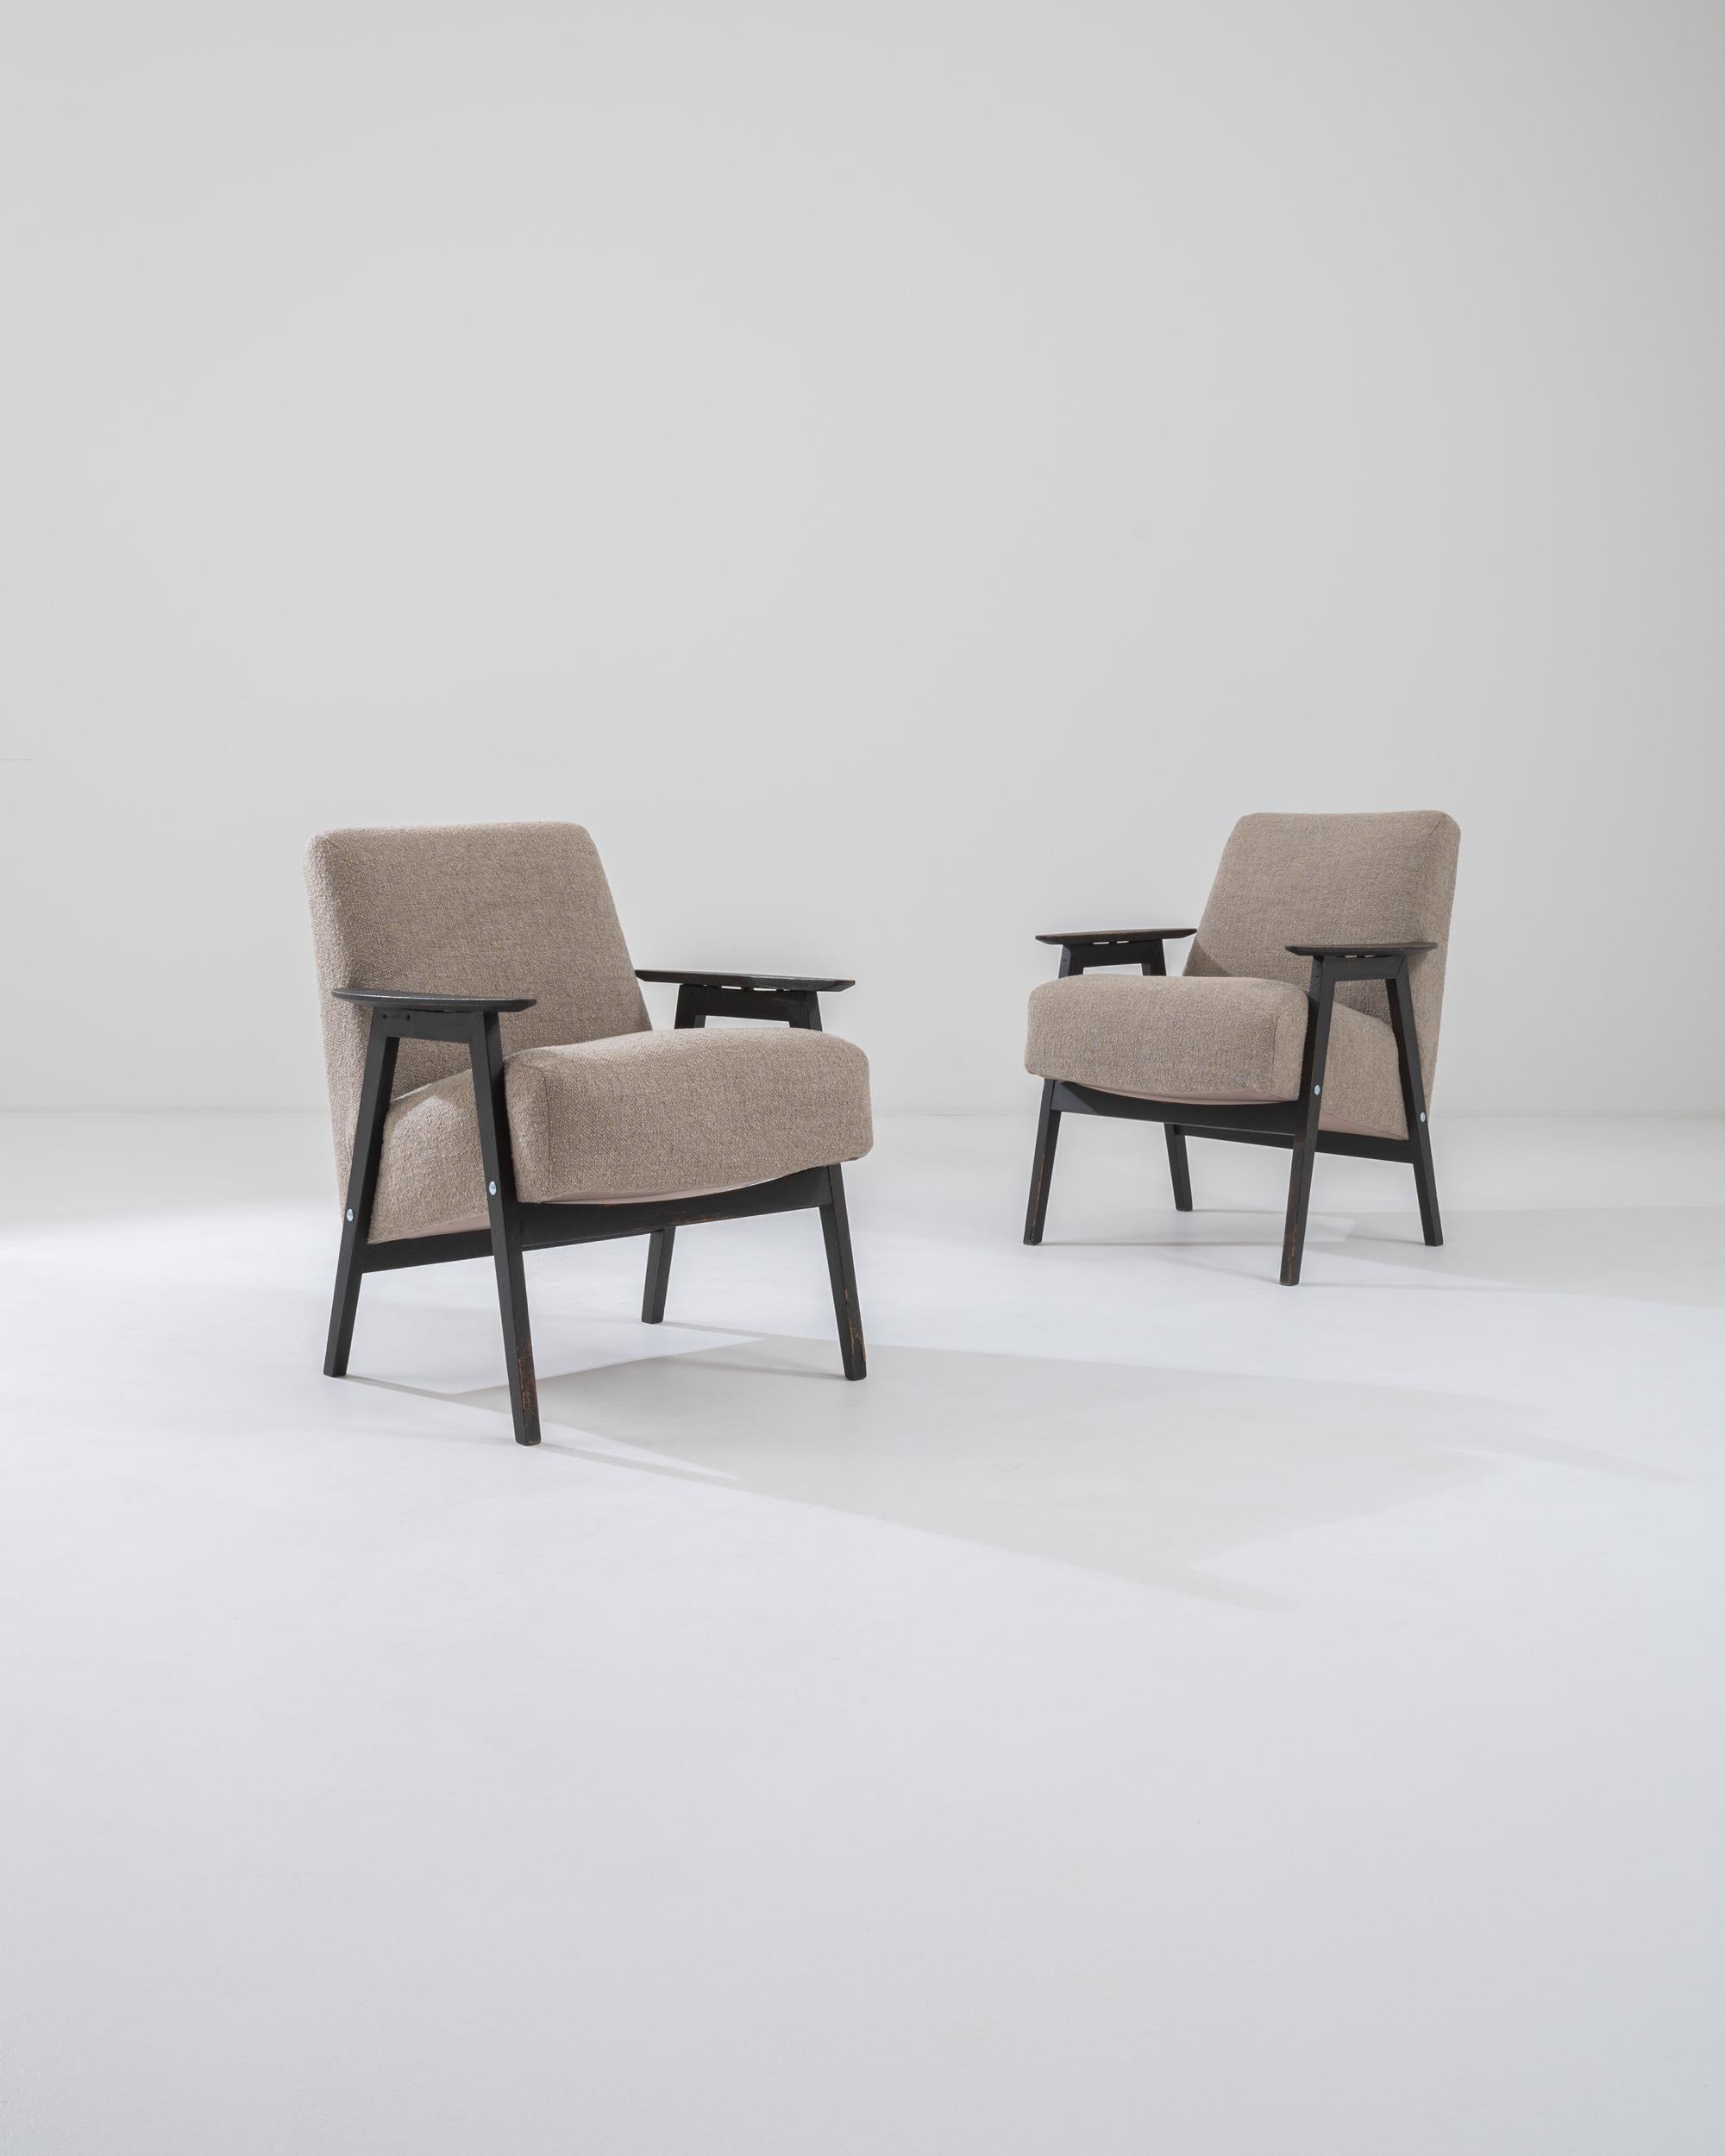 This pair of 1960s armchairs epitomizes the restful equilibrium of Czech Modernist design. The bold geometries of the frame combine clean lines with a sense of harmonious balance, while the reclined position of the generously cushioned seat creates